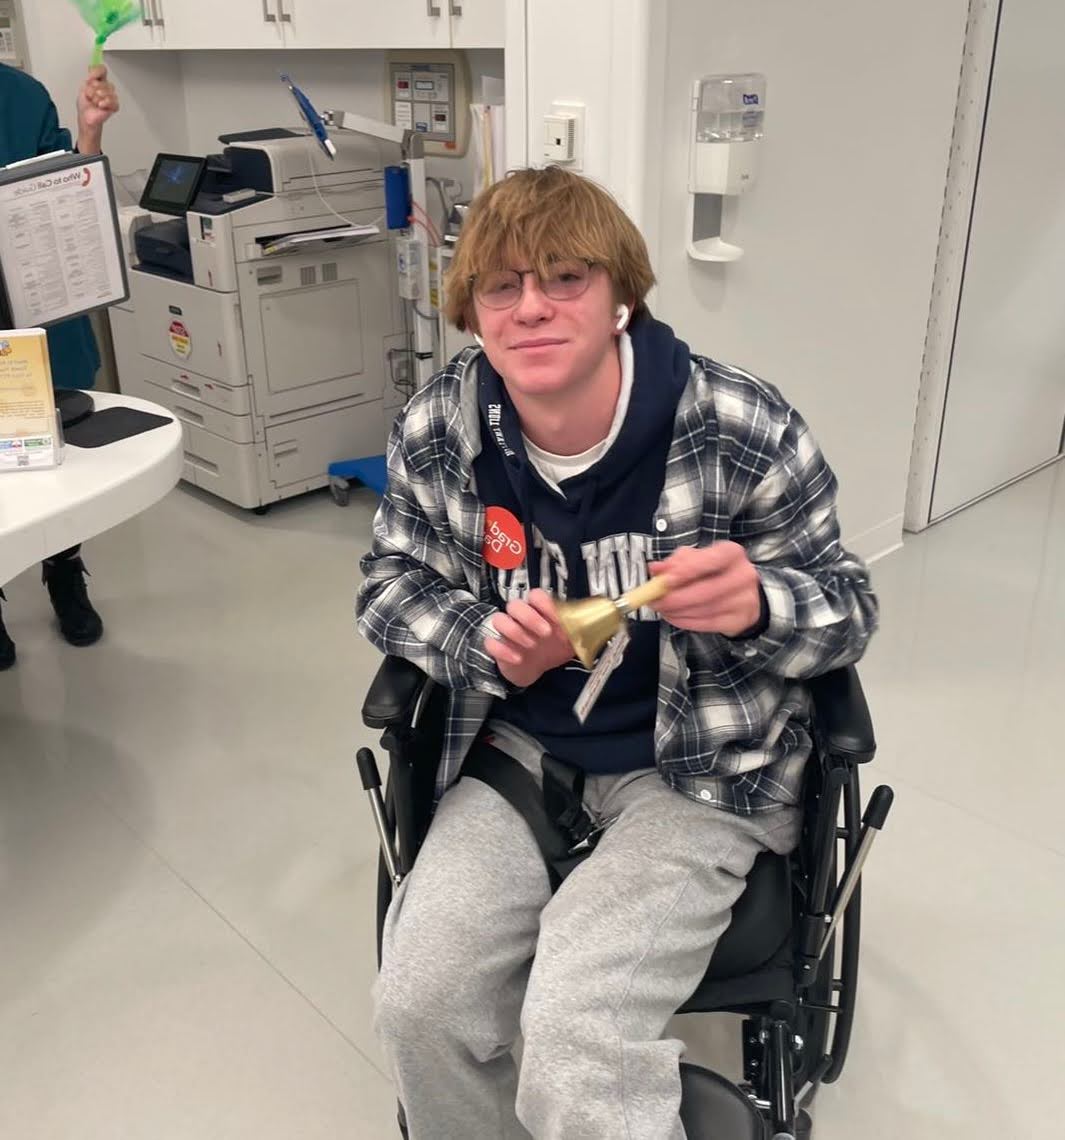 Jake ringing the graduation bell at Shirley Ryan Ability Lab
